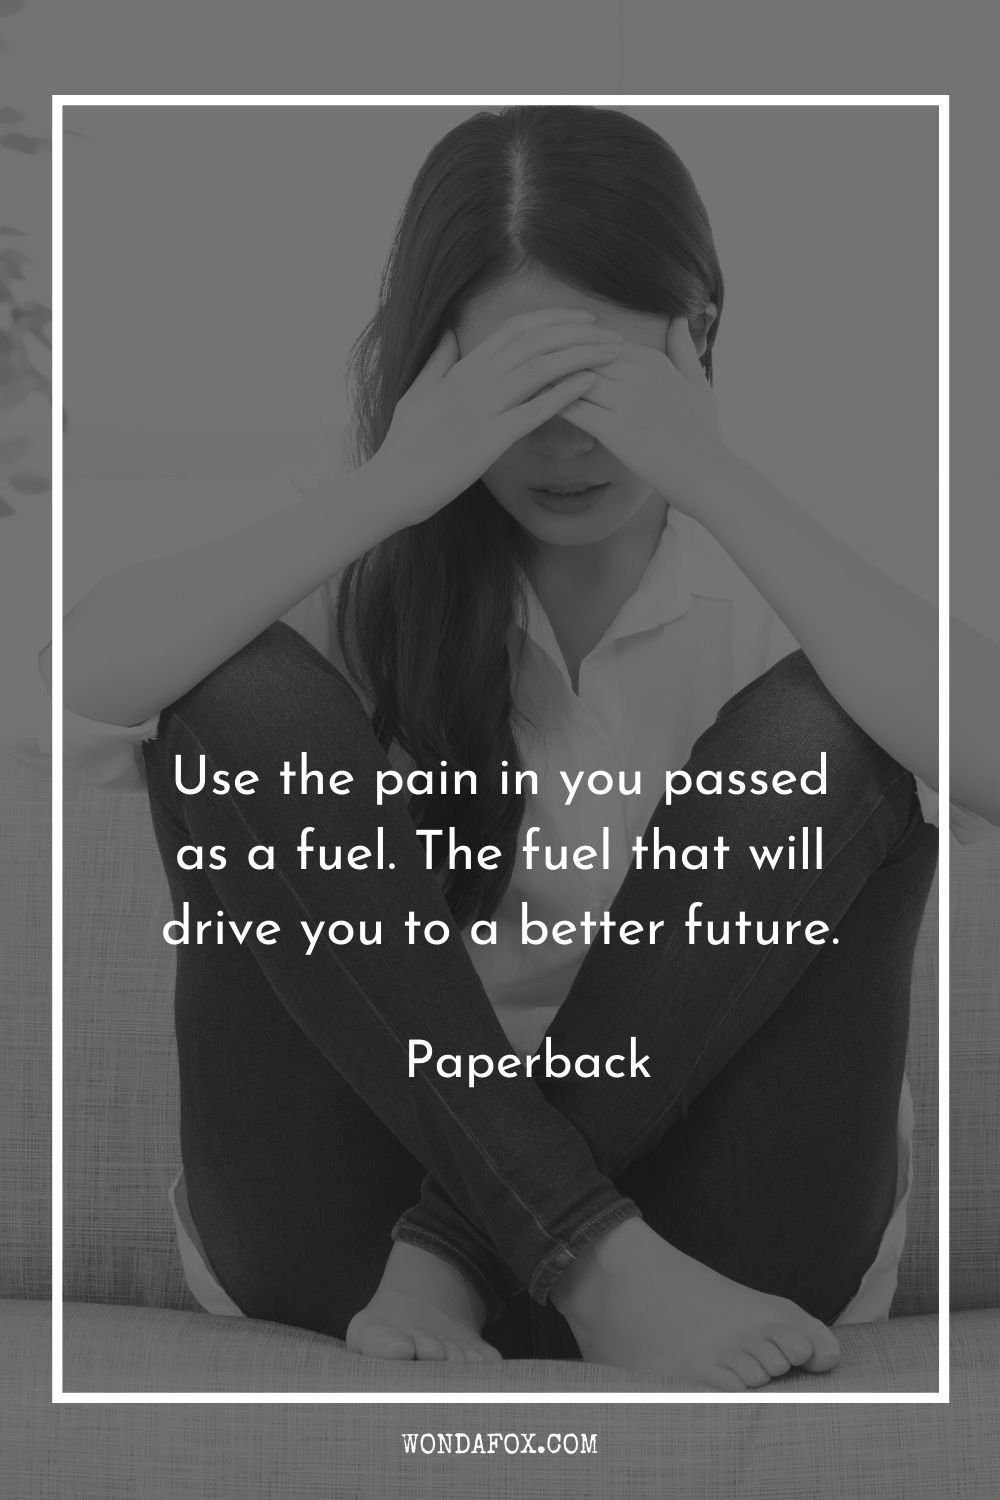 Use the pain in you passed as a fuel. The fuel that will drive you to a better future.